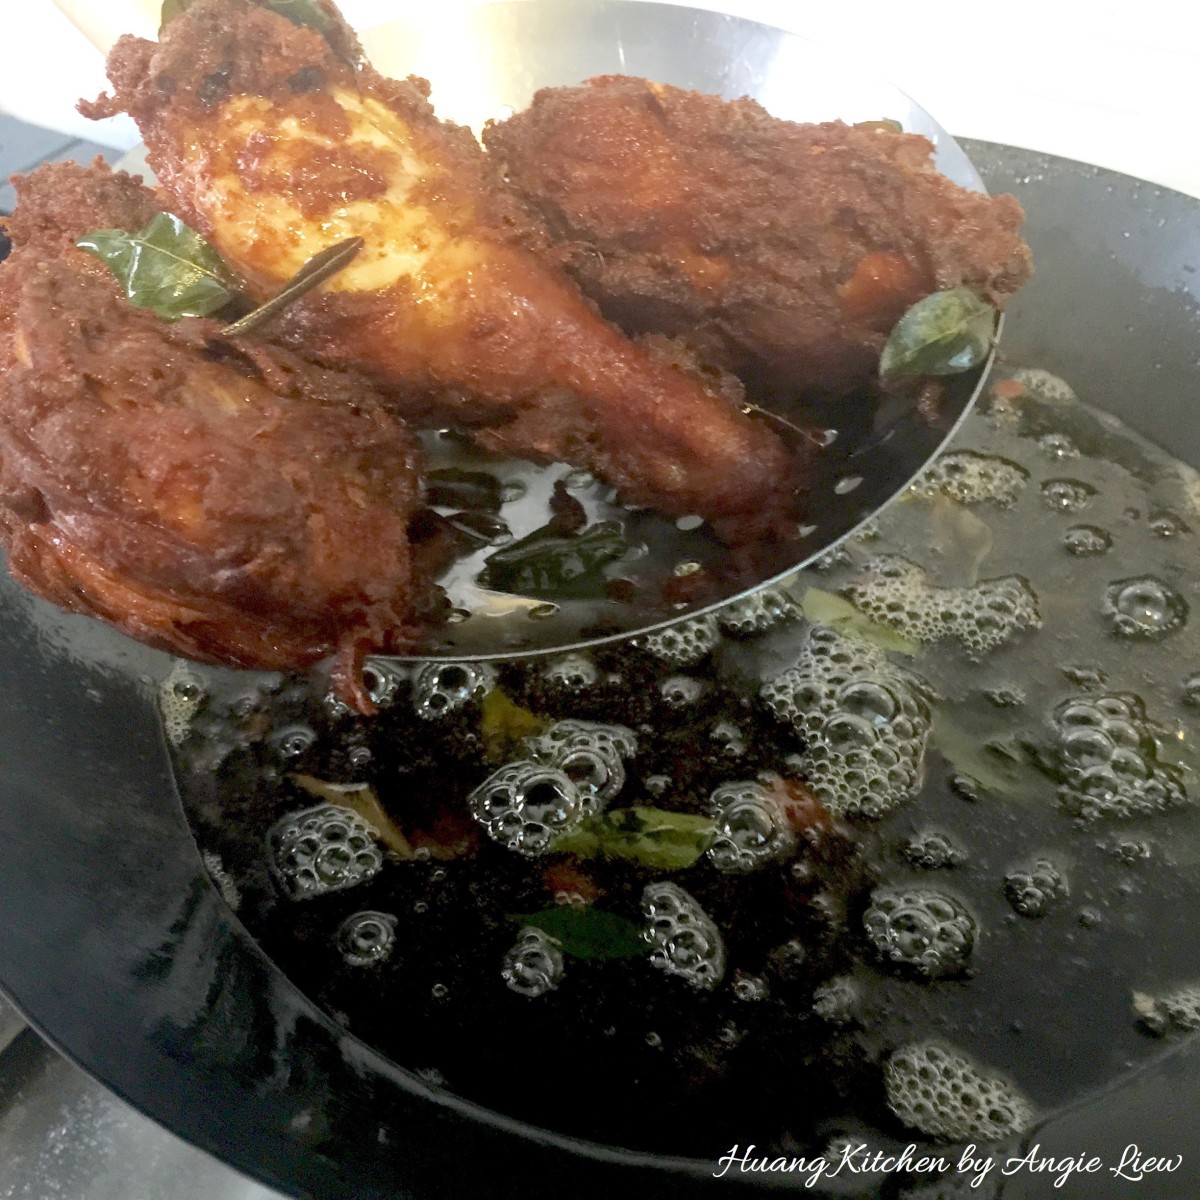 Ayam Goreng Berempah Recipe (Malay Spiced Fried Chicken) - remove from oil